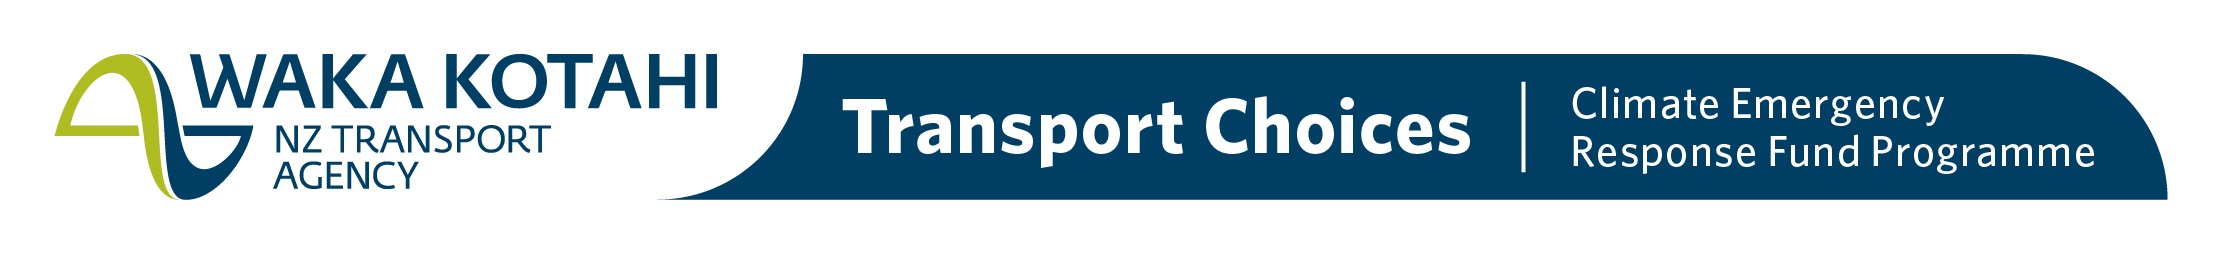 The Transport Choices - Climate Emergency Response Fund Programme logo